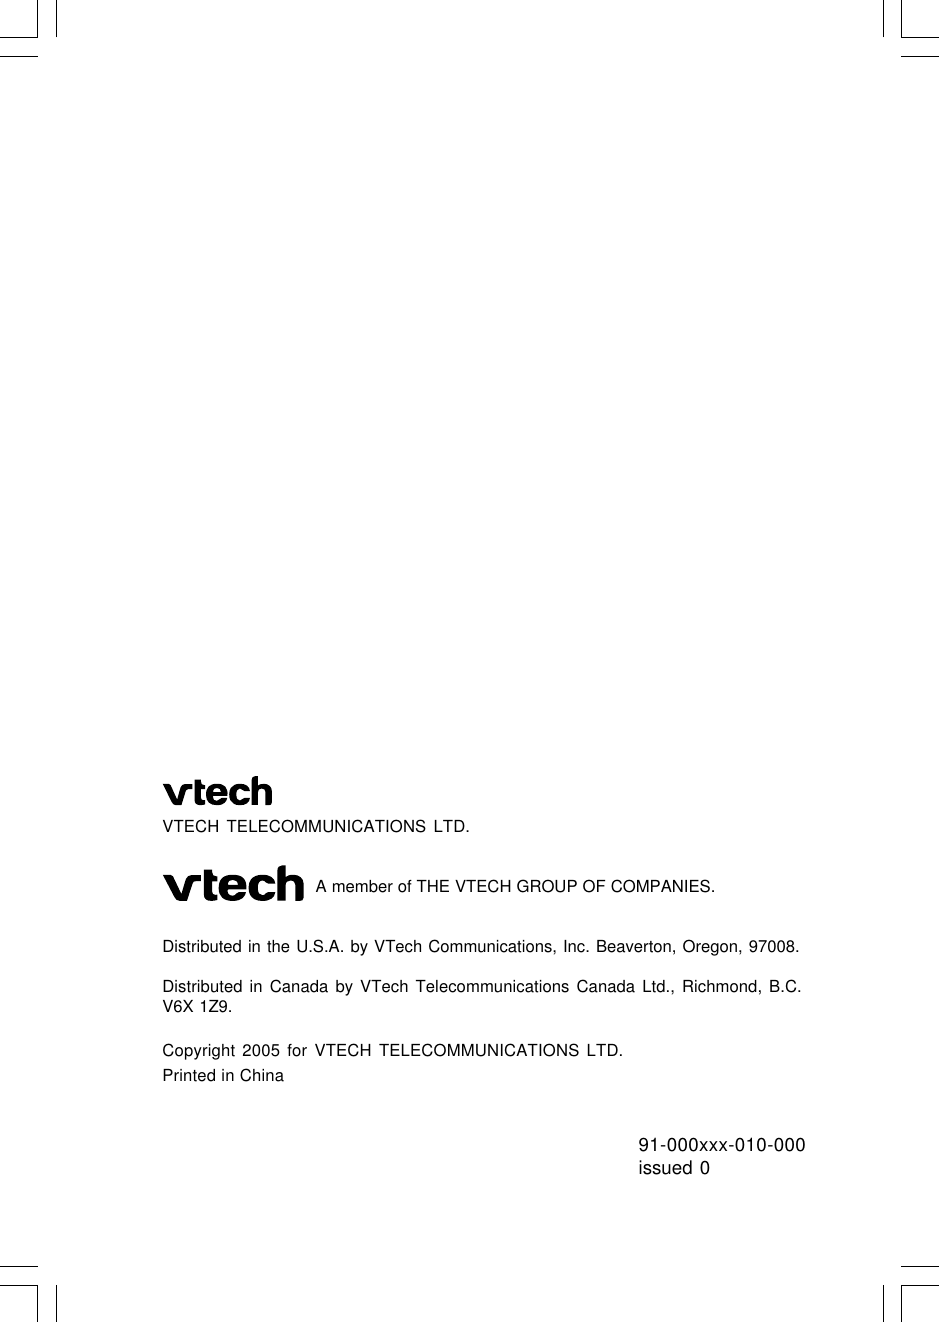 91-000xxx-010-000issued 0VTECH TELECOMMUNICATIONS LTD.                               A member of THE VTECH GROUP OF COMPANIES.Distributed in the U.S.A. by VTech Communications, Inc. Beaverton, Oregon, 97008.Distributed in Canada by VTech Telecommunications Canada Ltd., Richmond, B.C.V6X 1Z9.Copyright 2005 for VTECH TELECOMMUNICATIONS LTD.Printed in China